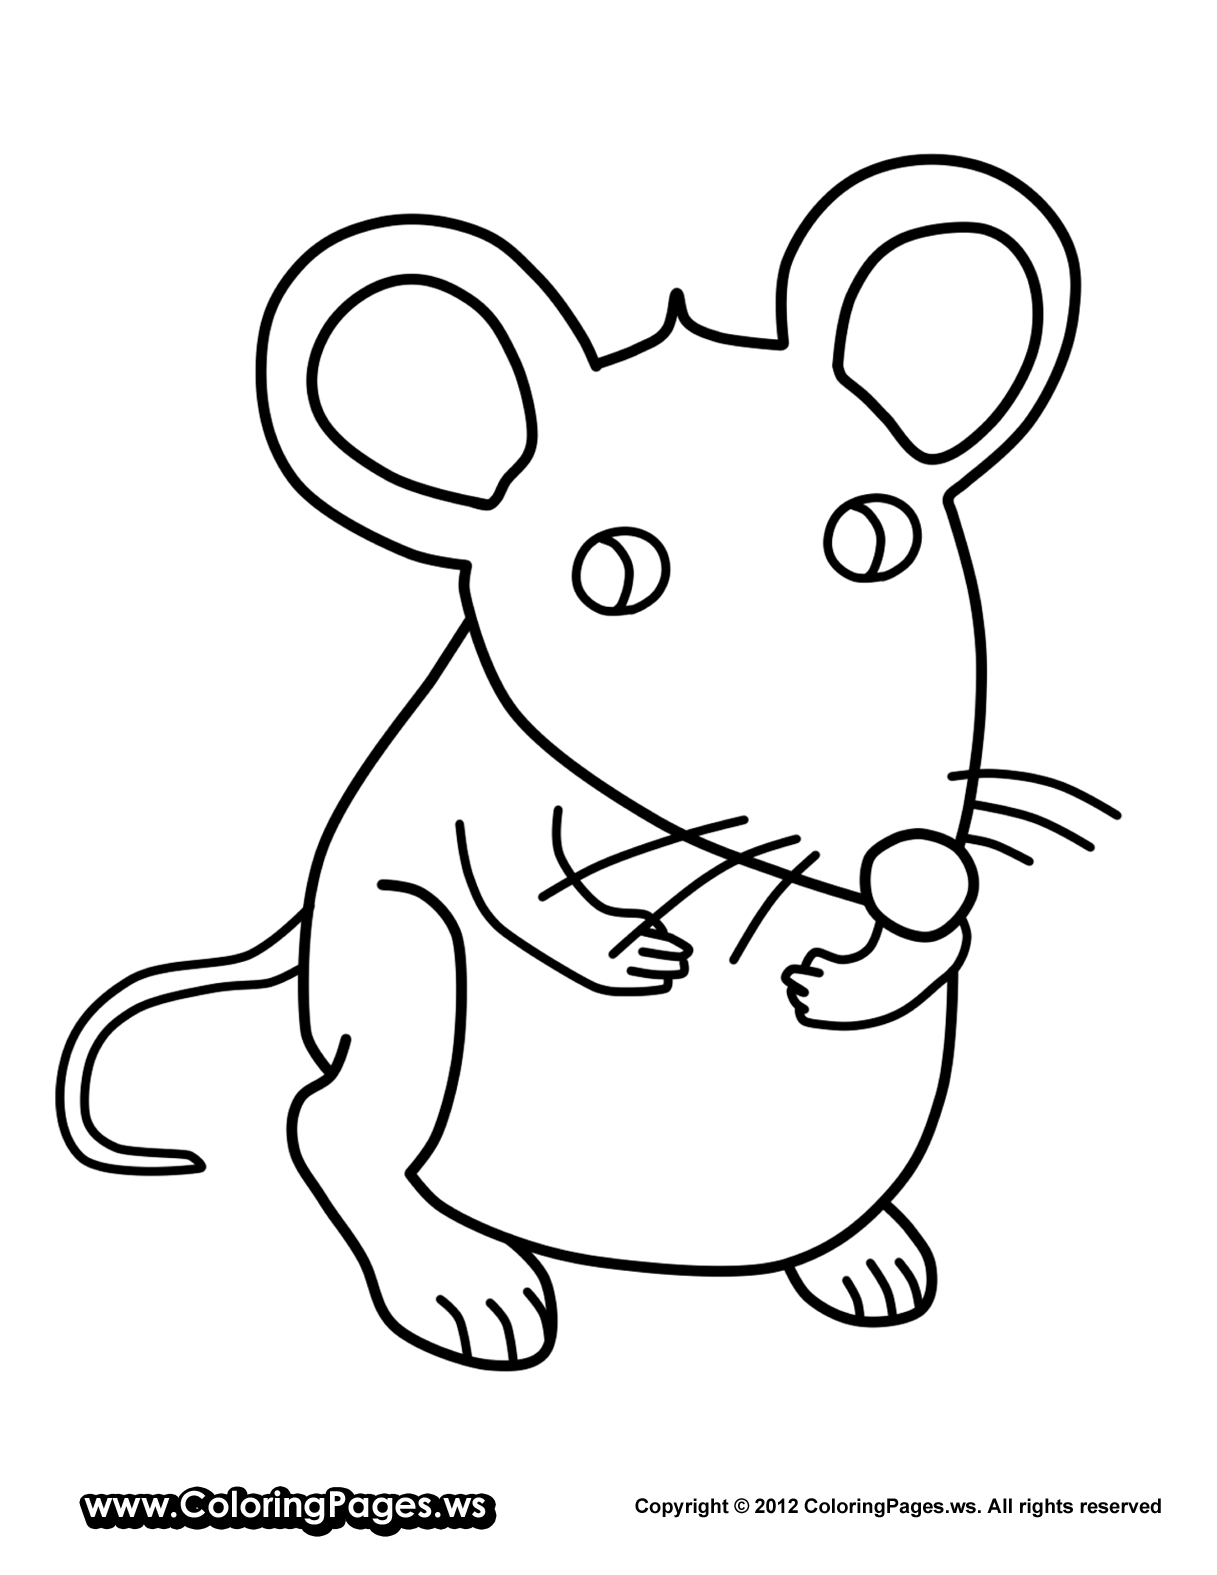 Mouse Coloring Pages - Kidsuki